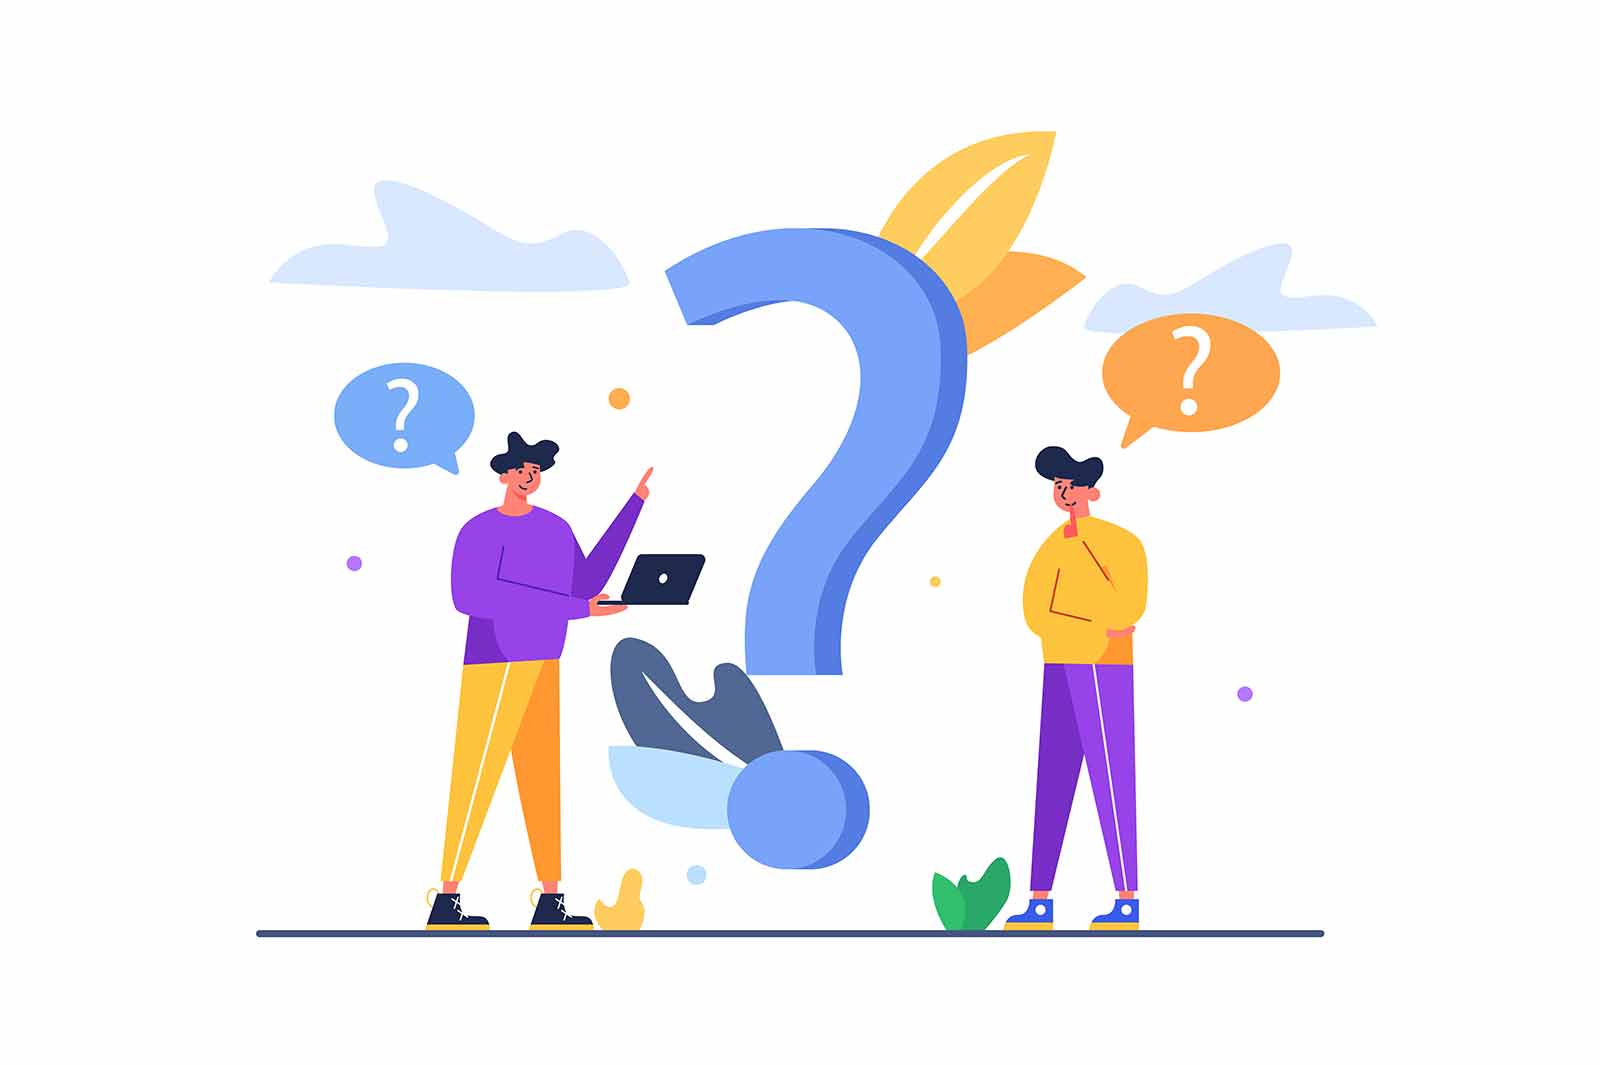 Two guys thinking how to answer the question asked them, big flat question mark, guy with folded hands thinking how to answer, isolated on white background, flat vector illustration